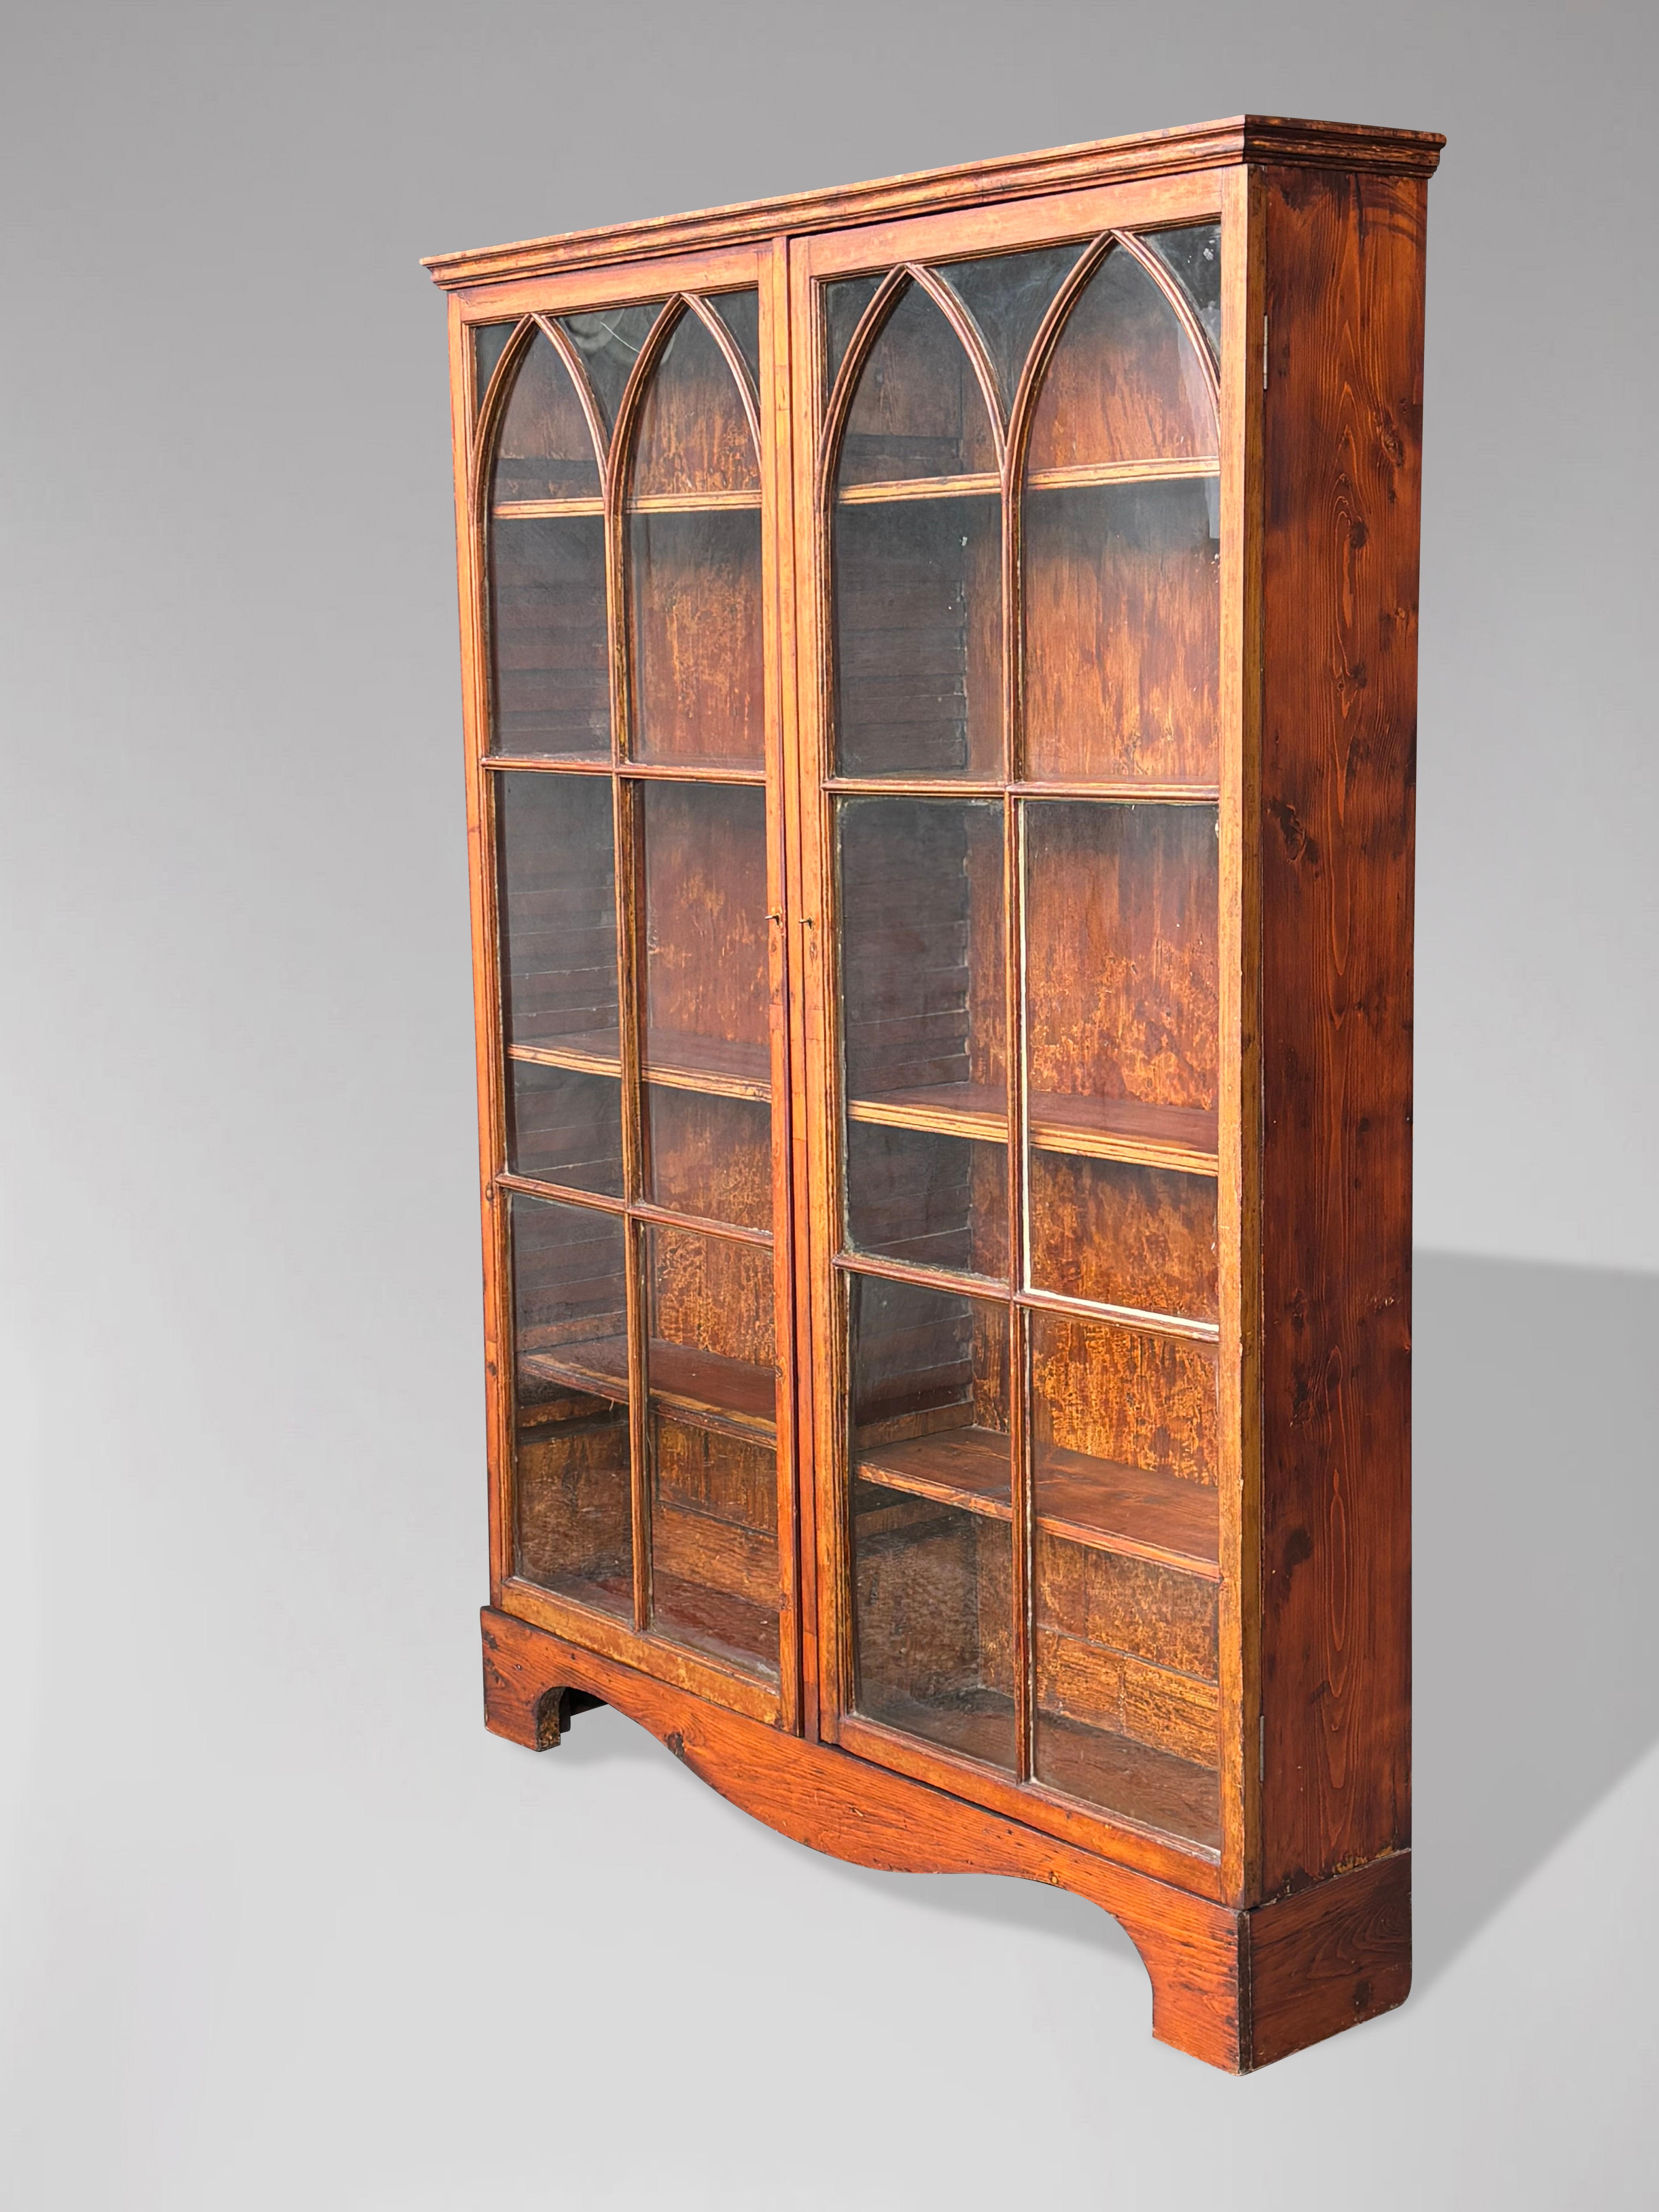 A late 19th century Gothic revival country house stained pine two door glazed bookcase or display cabinet. Moulded cornice above a pair of large stunning astragal glazed doors which enclose plenty of adjustable shelving. All standing on bracket